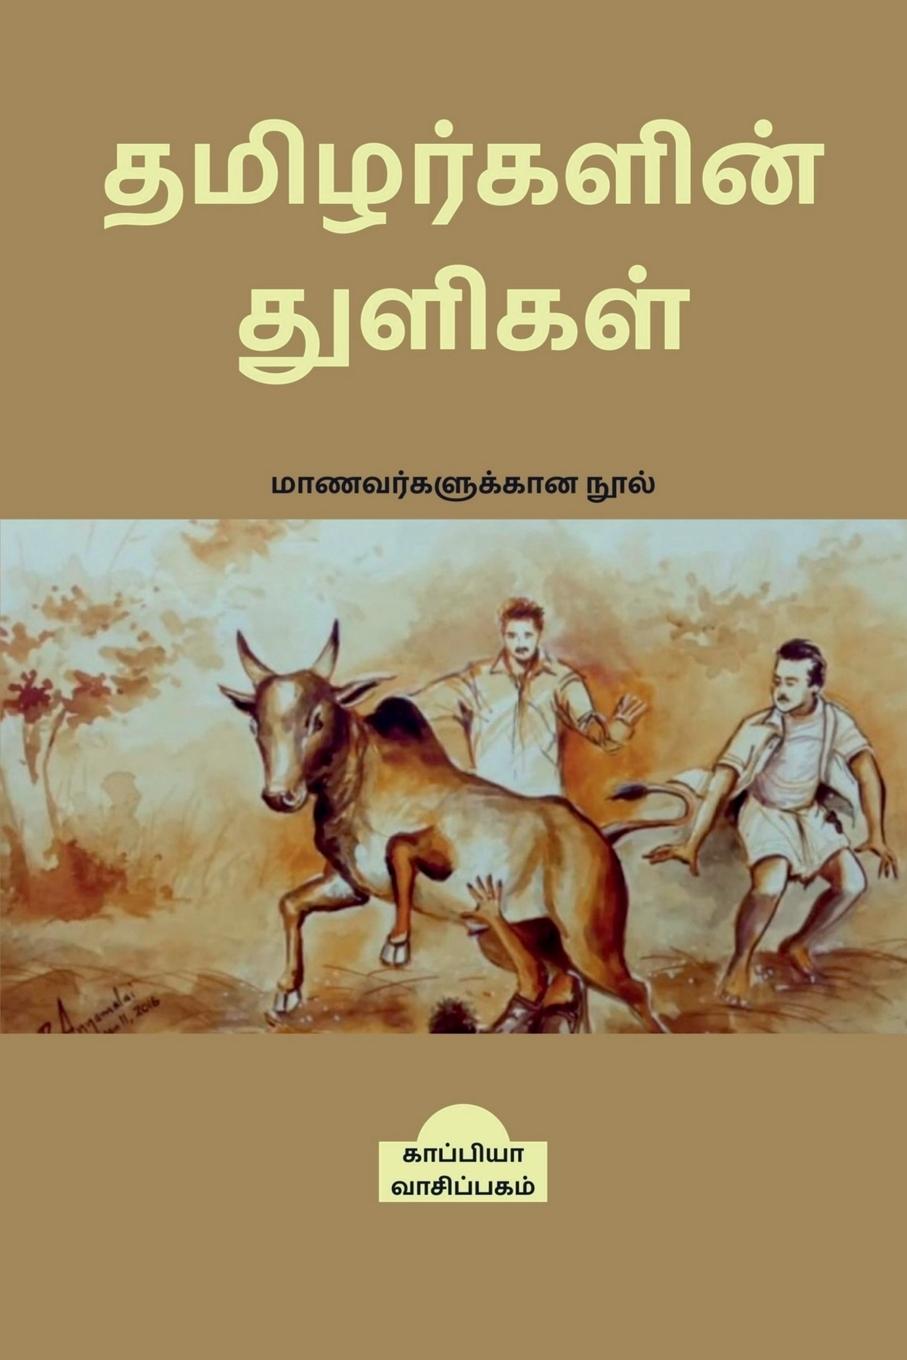 Book TAMIZHARKALIN THULIGAL (Student's guide) / &#2980;&#2990;&#3007;&#2996;&#2992;&#3021;&#2965;&#2995;&#3007;&#2985;&#3021; &#2980;&#3009;&#2995;&#3007;& 